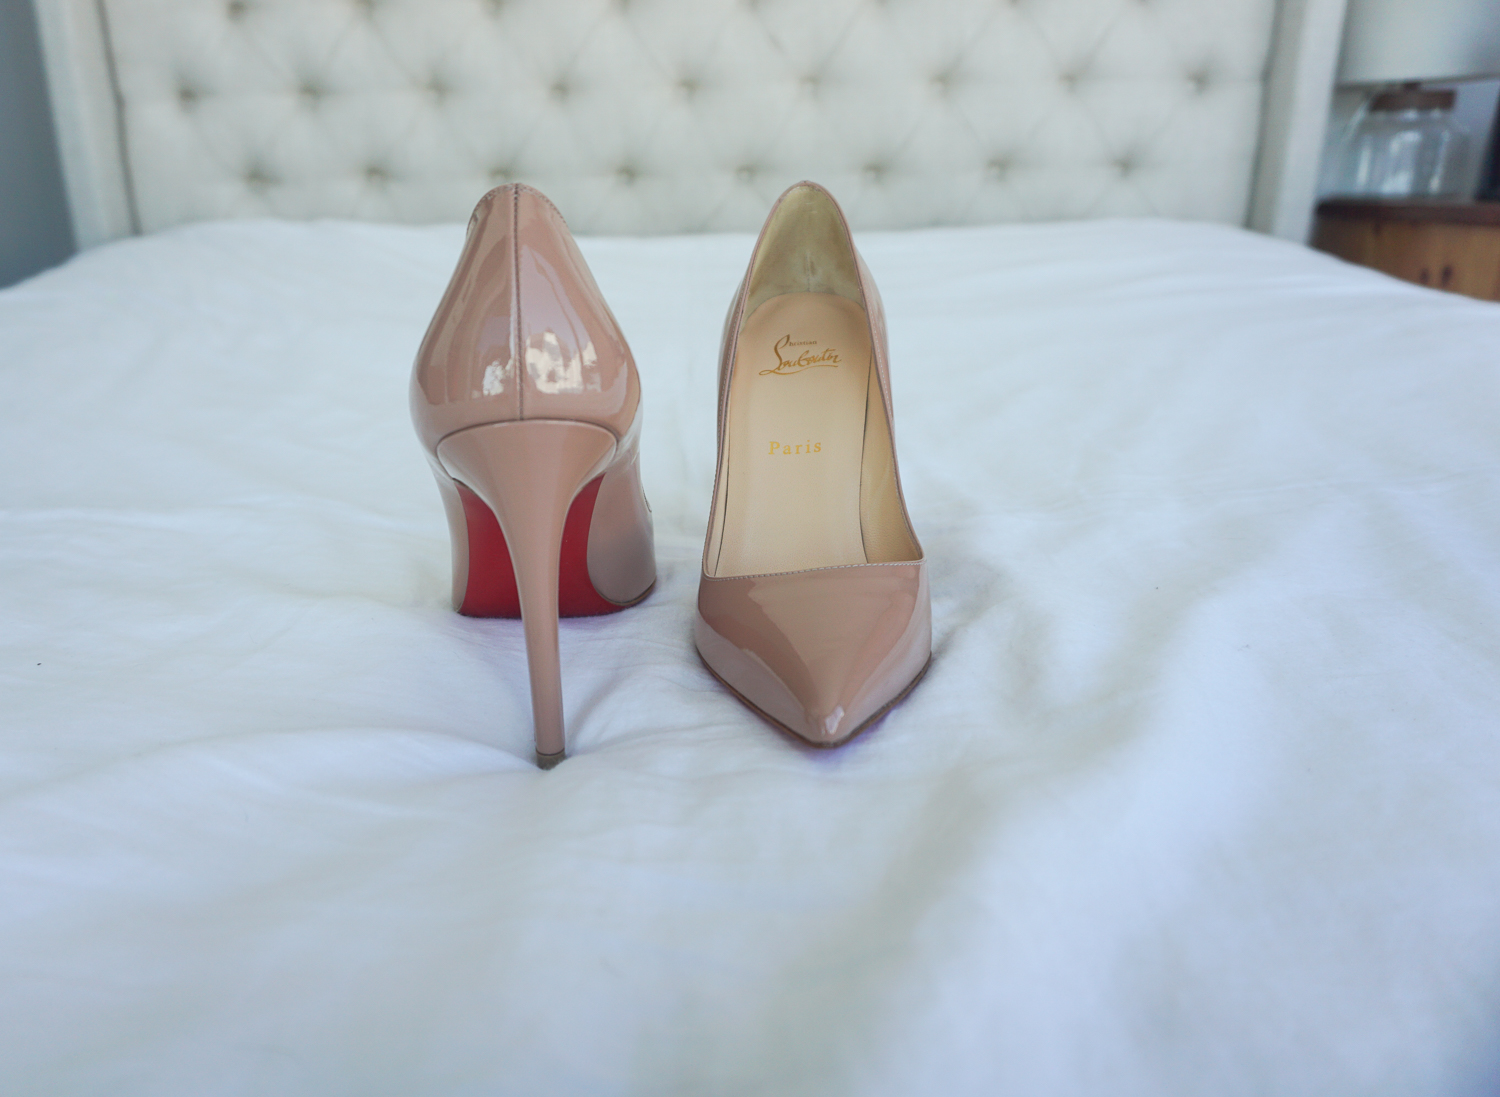 Find Out Where To Get The Shoes  Heels, Fun heels, Christian louboutin